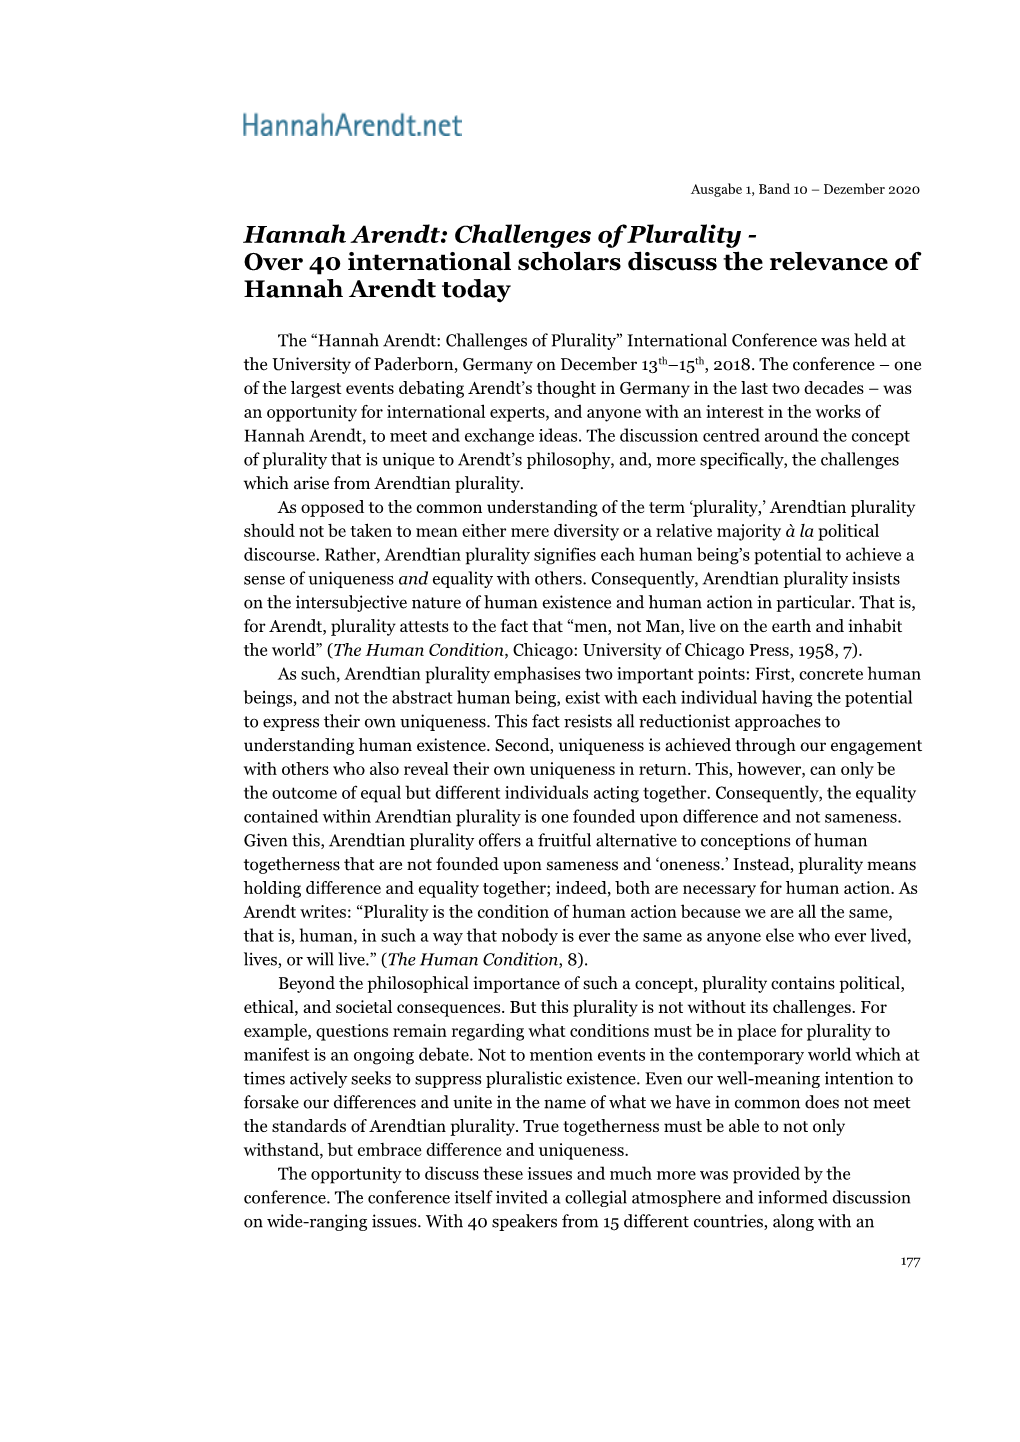 Hannah Arendt: Challenges of Plurality - Over 40 International Scholars Discuss the Relevance of Hannah Arendt Today